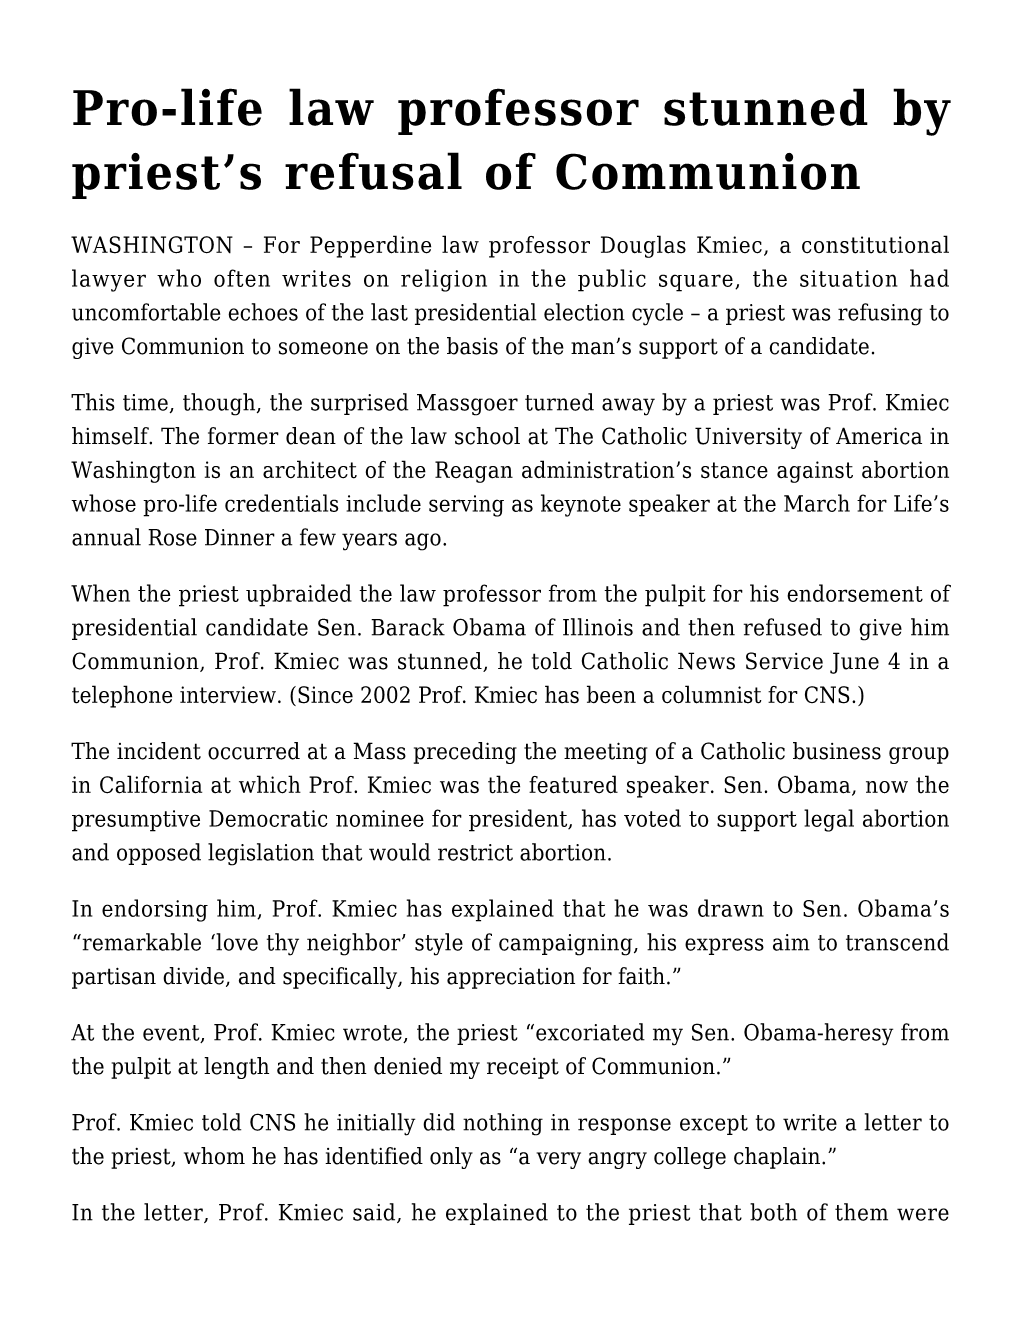 Pro-Life Law Professor Stunned by Priest's Refusal of Communion